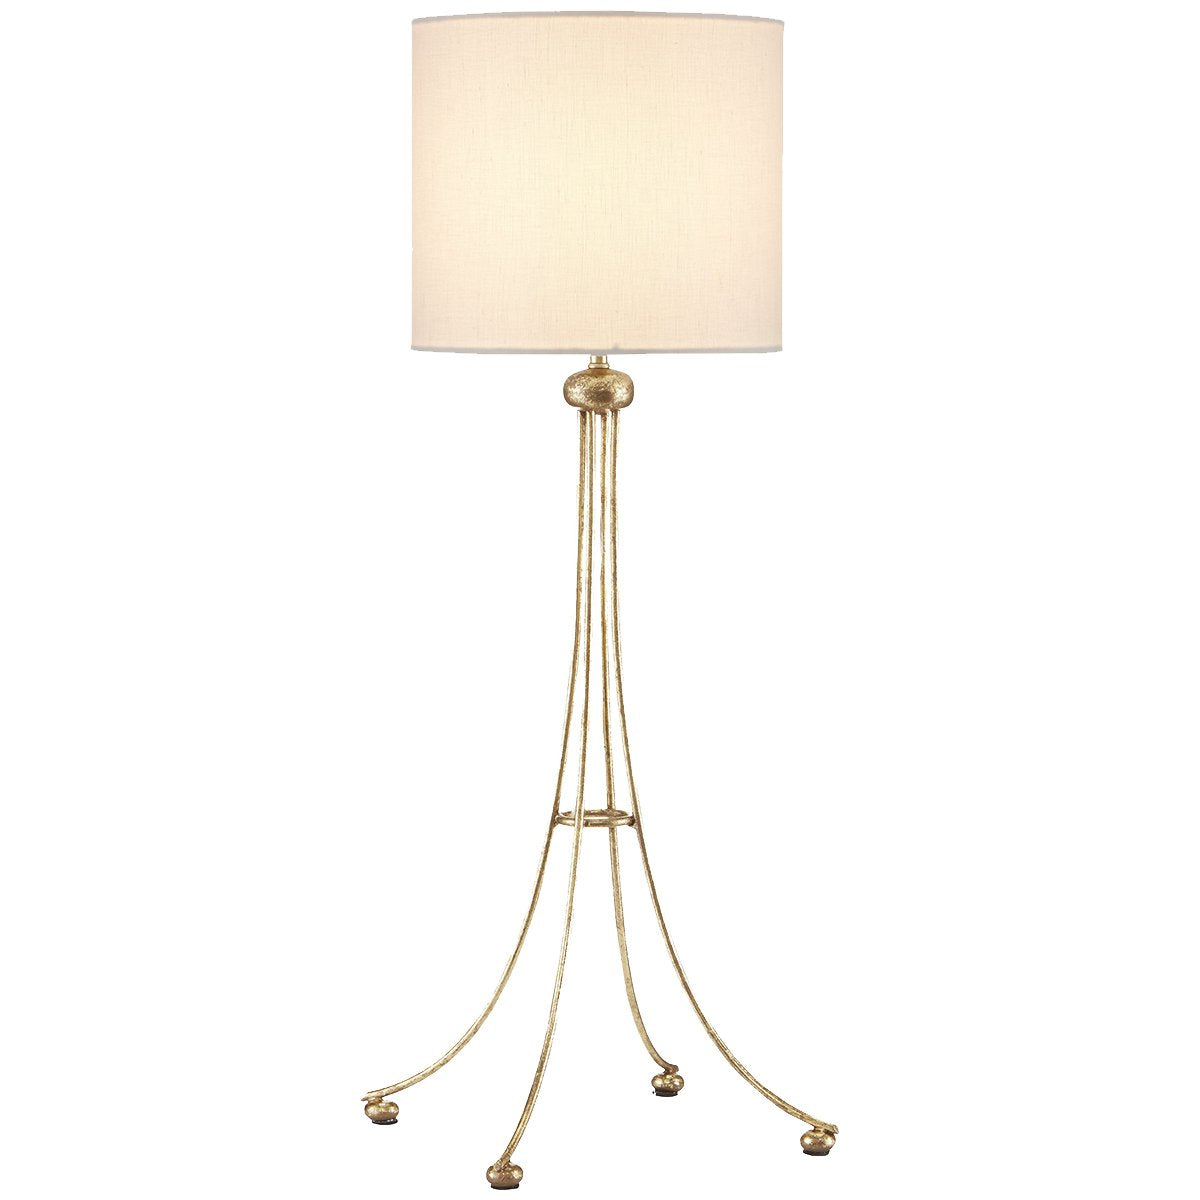 Currey and Company Chesterton Large Table Lamp